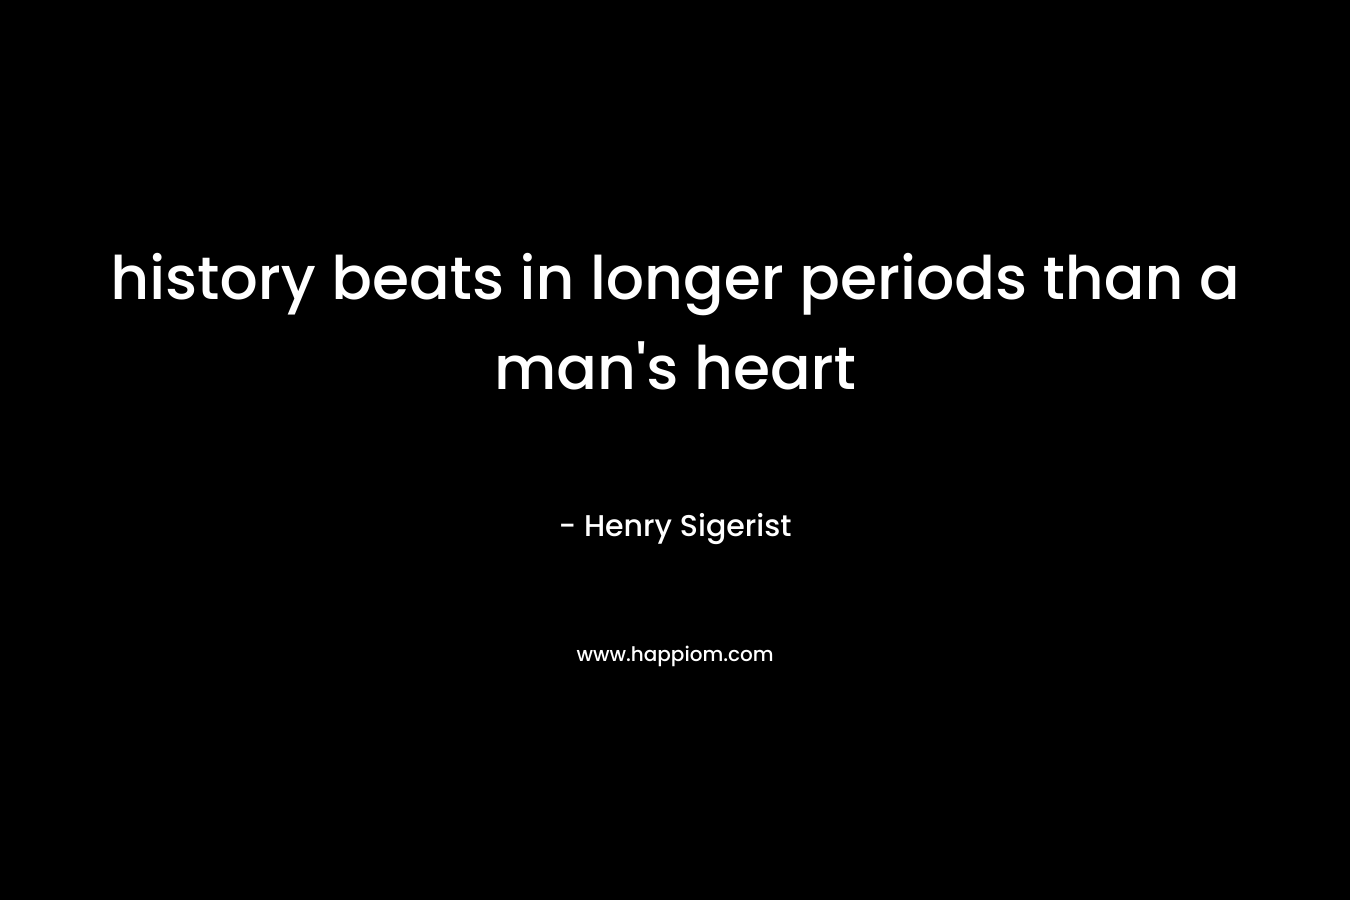 history beats in longer periods than a man's heart